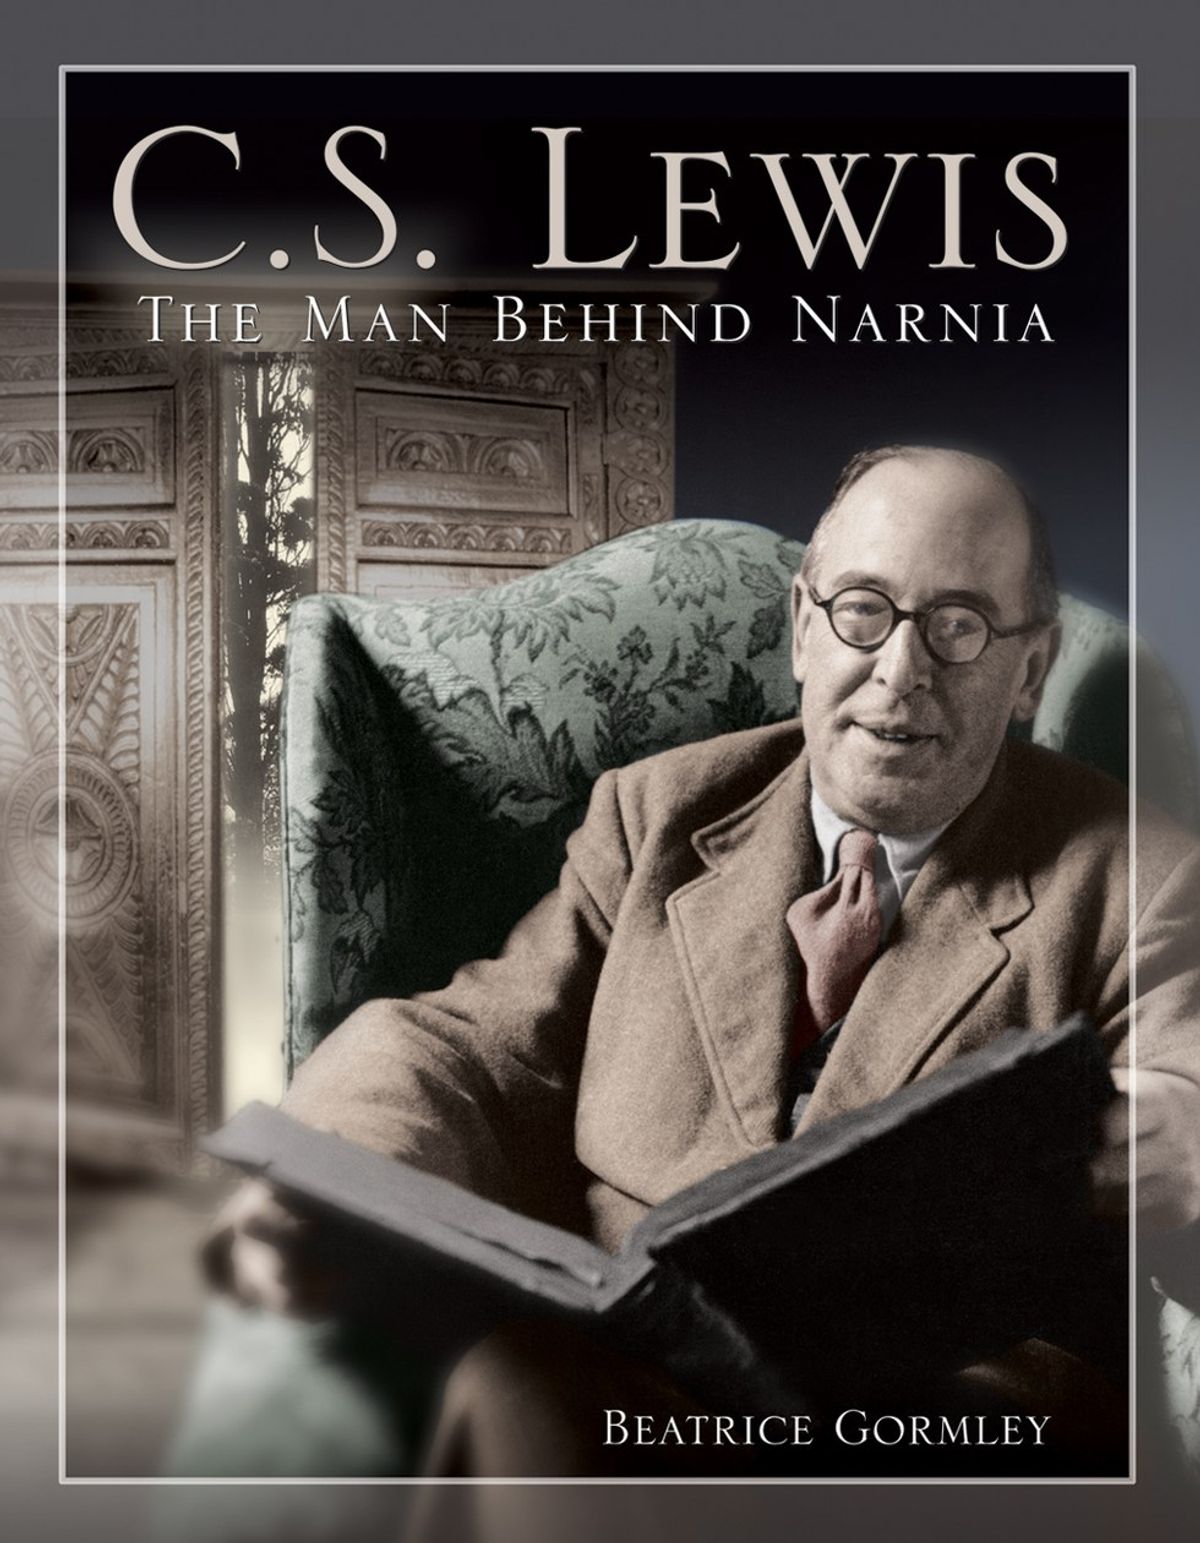 A Review Of C.S. Lewis's "The World's Last Night And Other Essays"